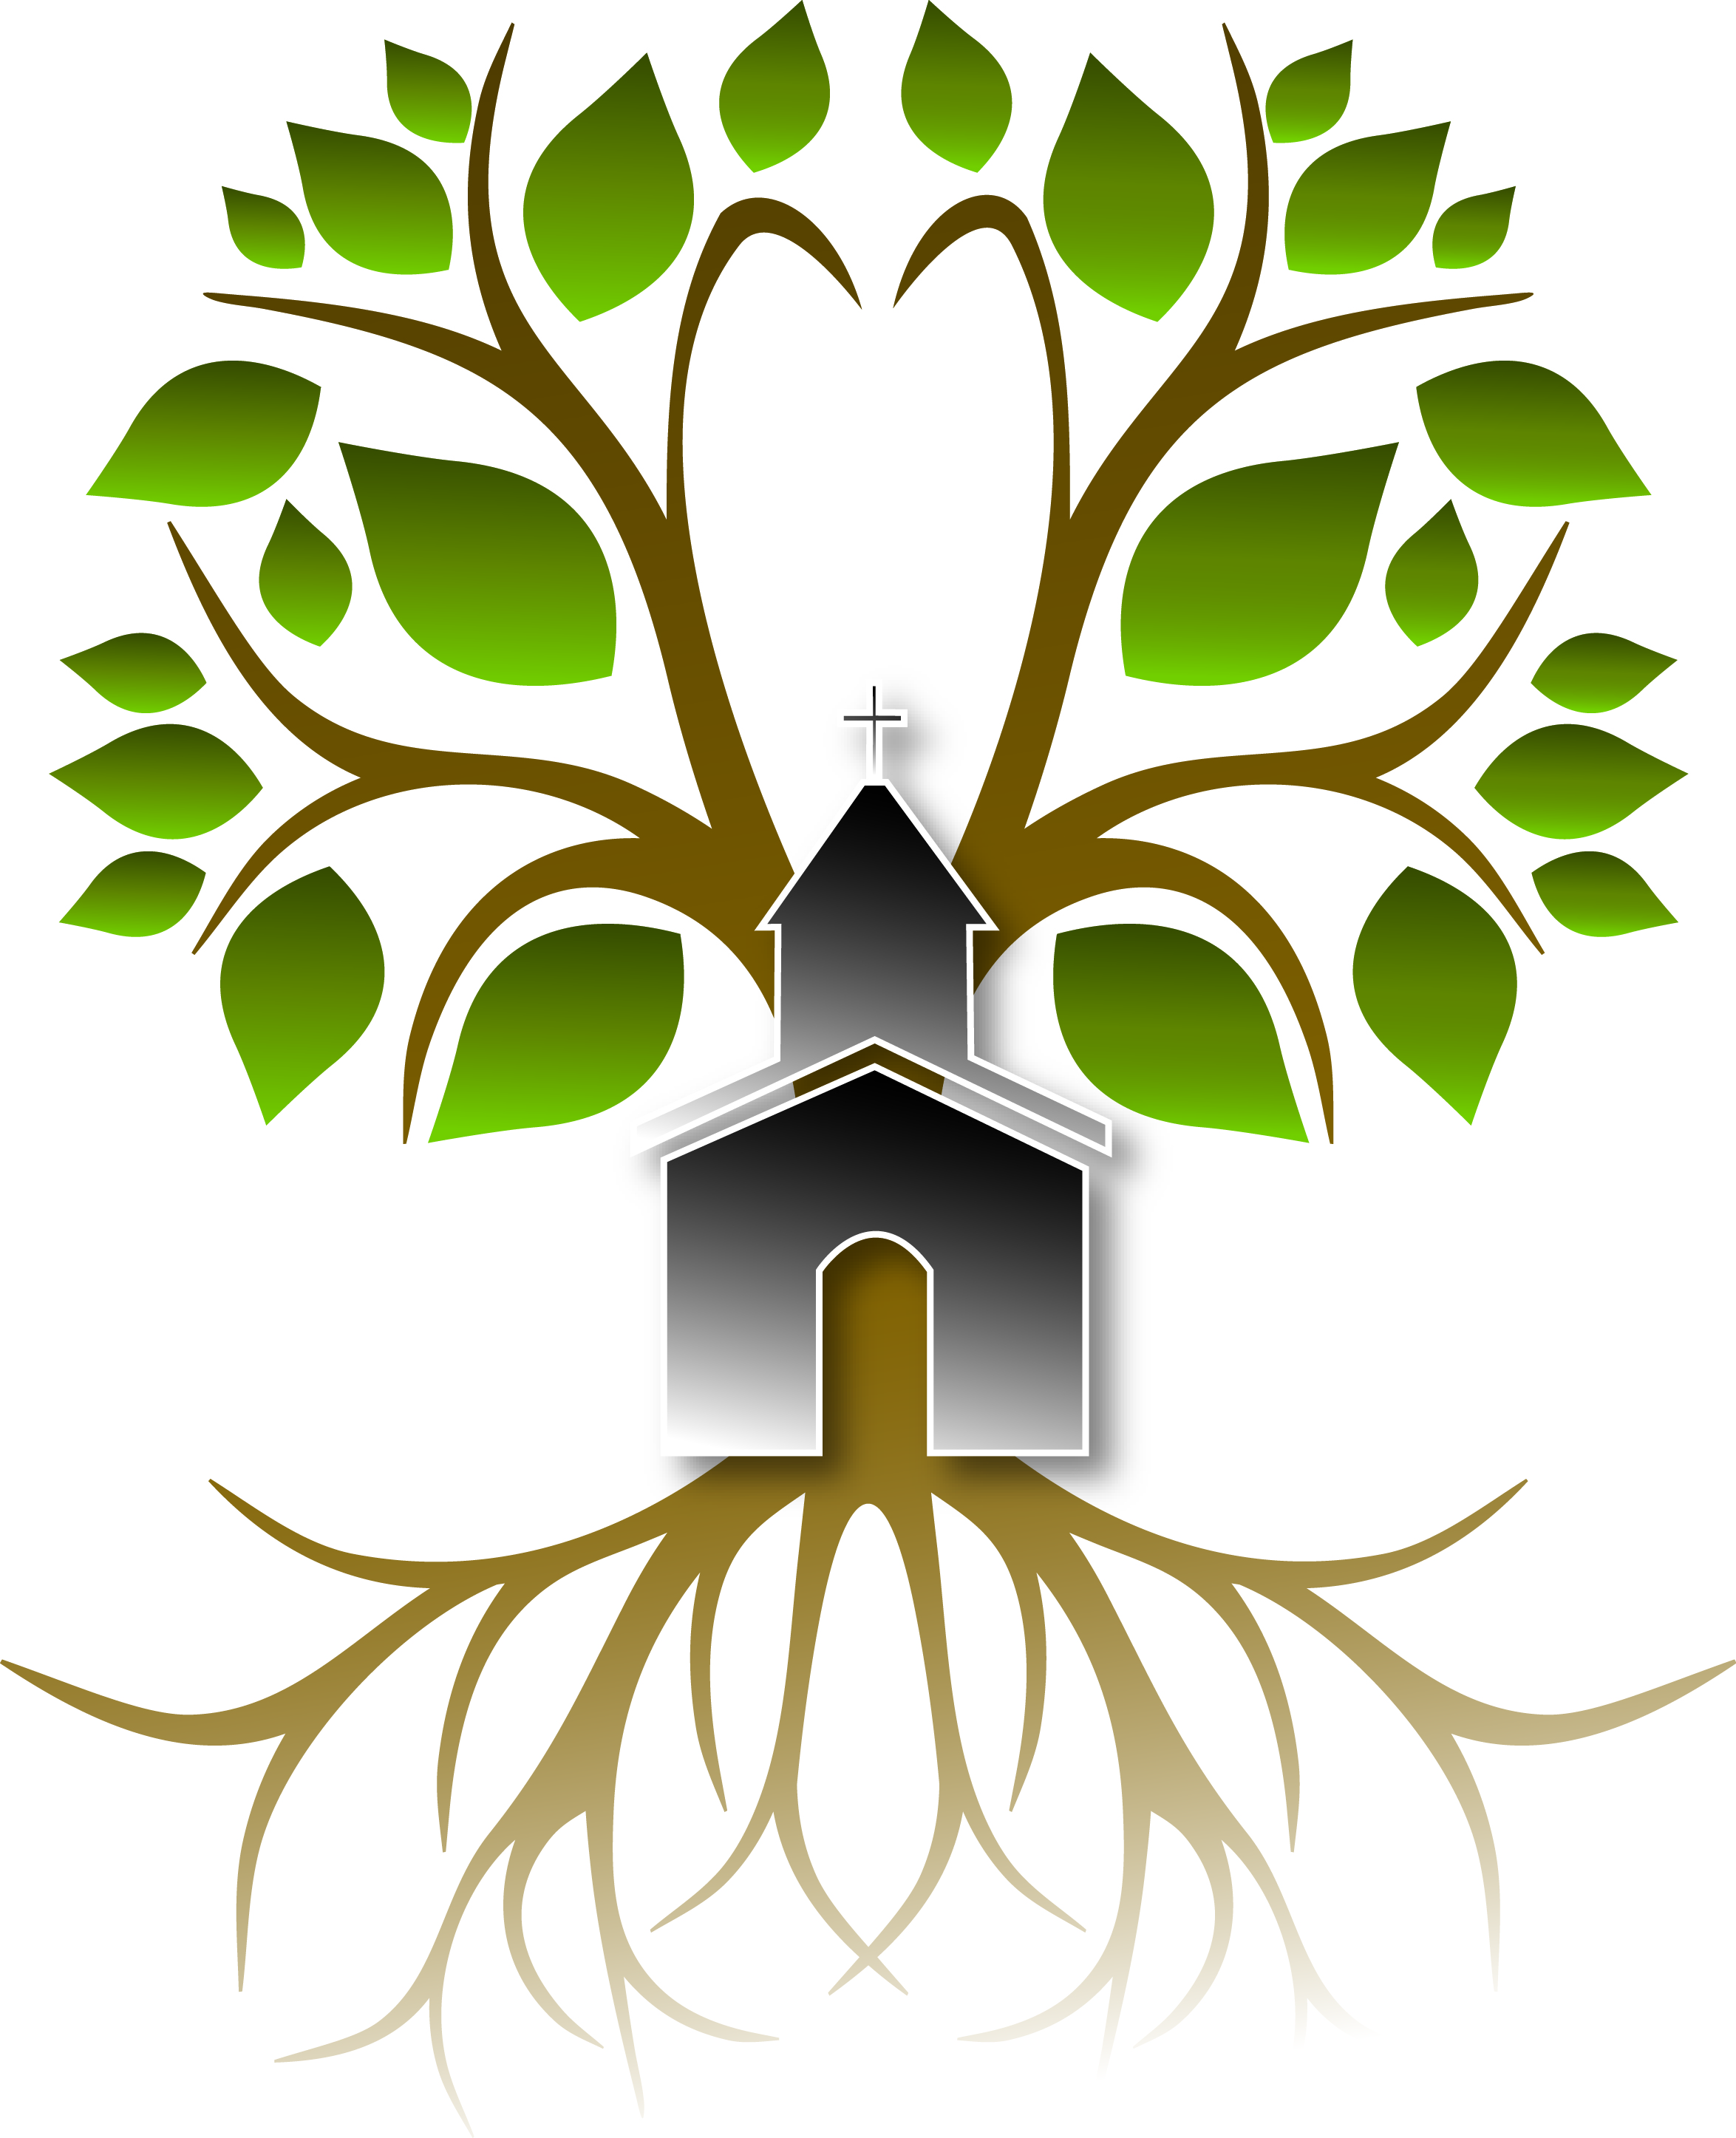 Free tree with roots clipart